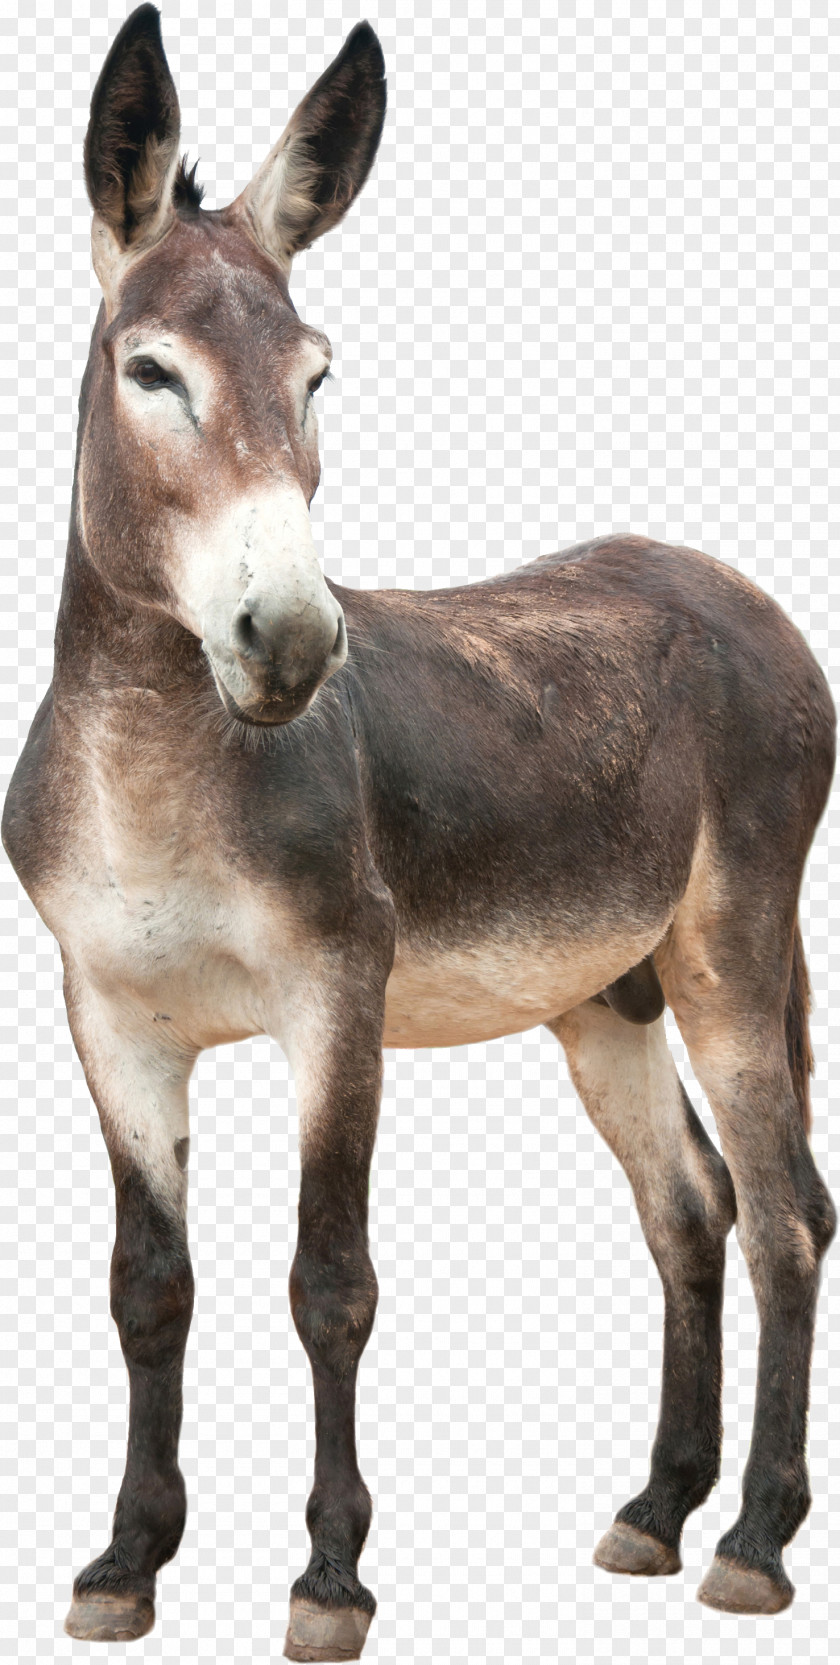 Donkey PNG clipart PNG